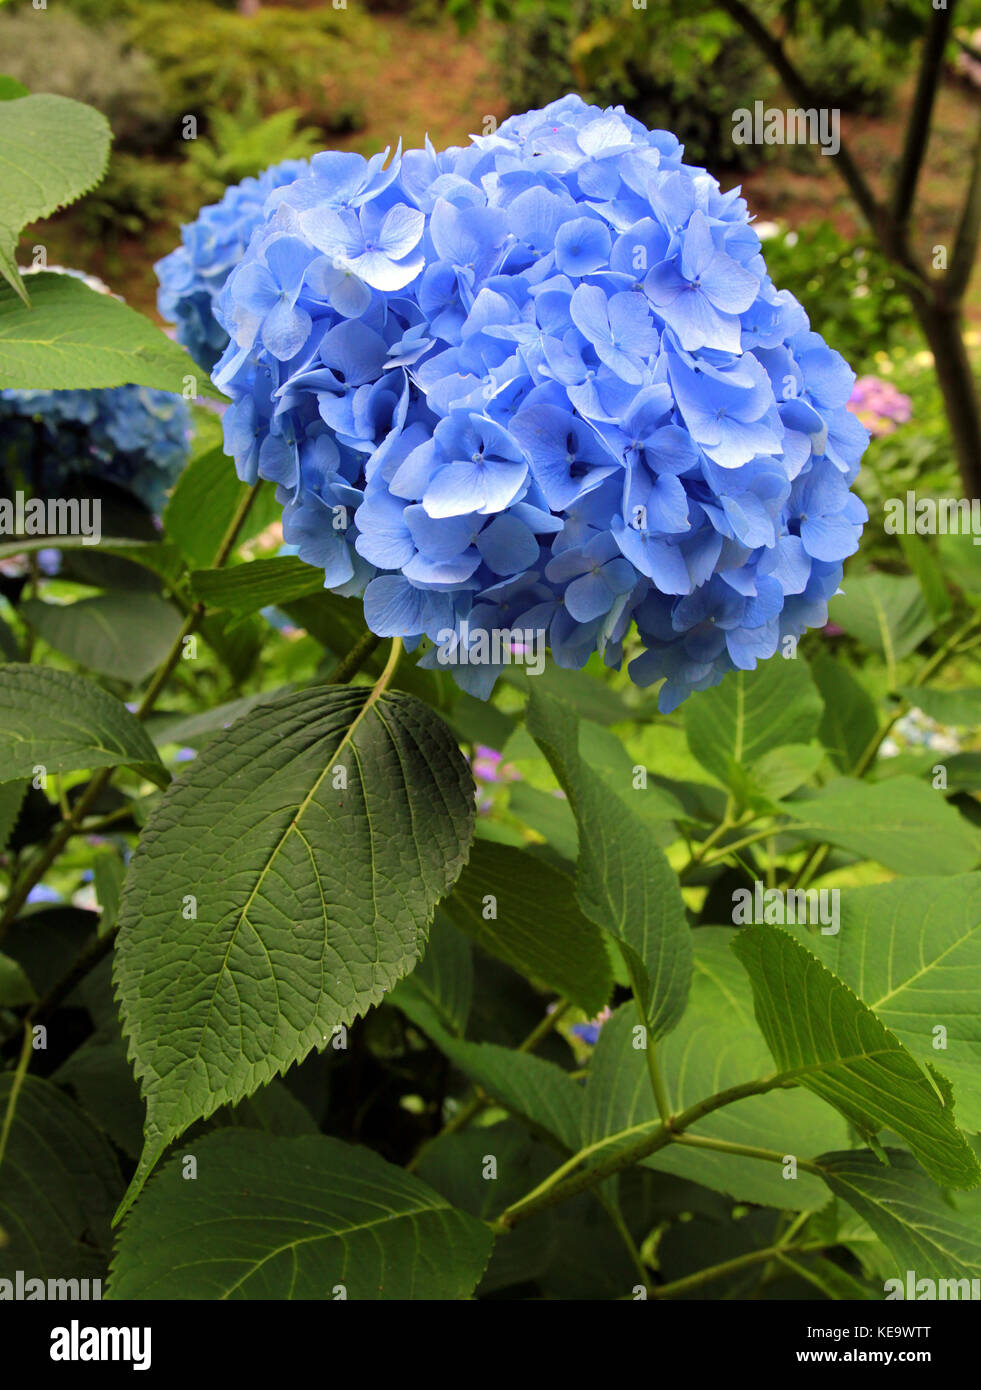 Blue Hyadrangea flower  in a garden setting. Single head on plant is shown close up. The blue color is vivid and pretty. Stock Photo